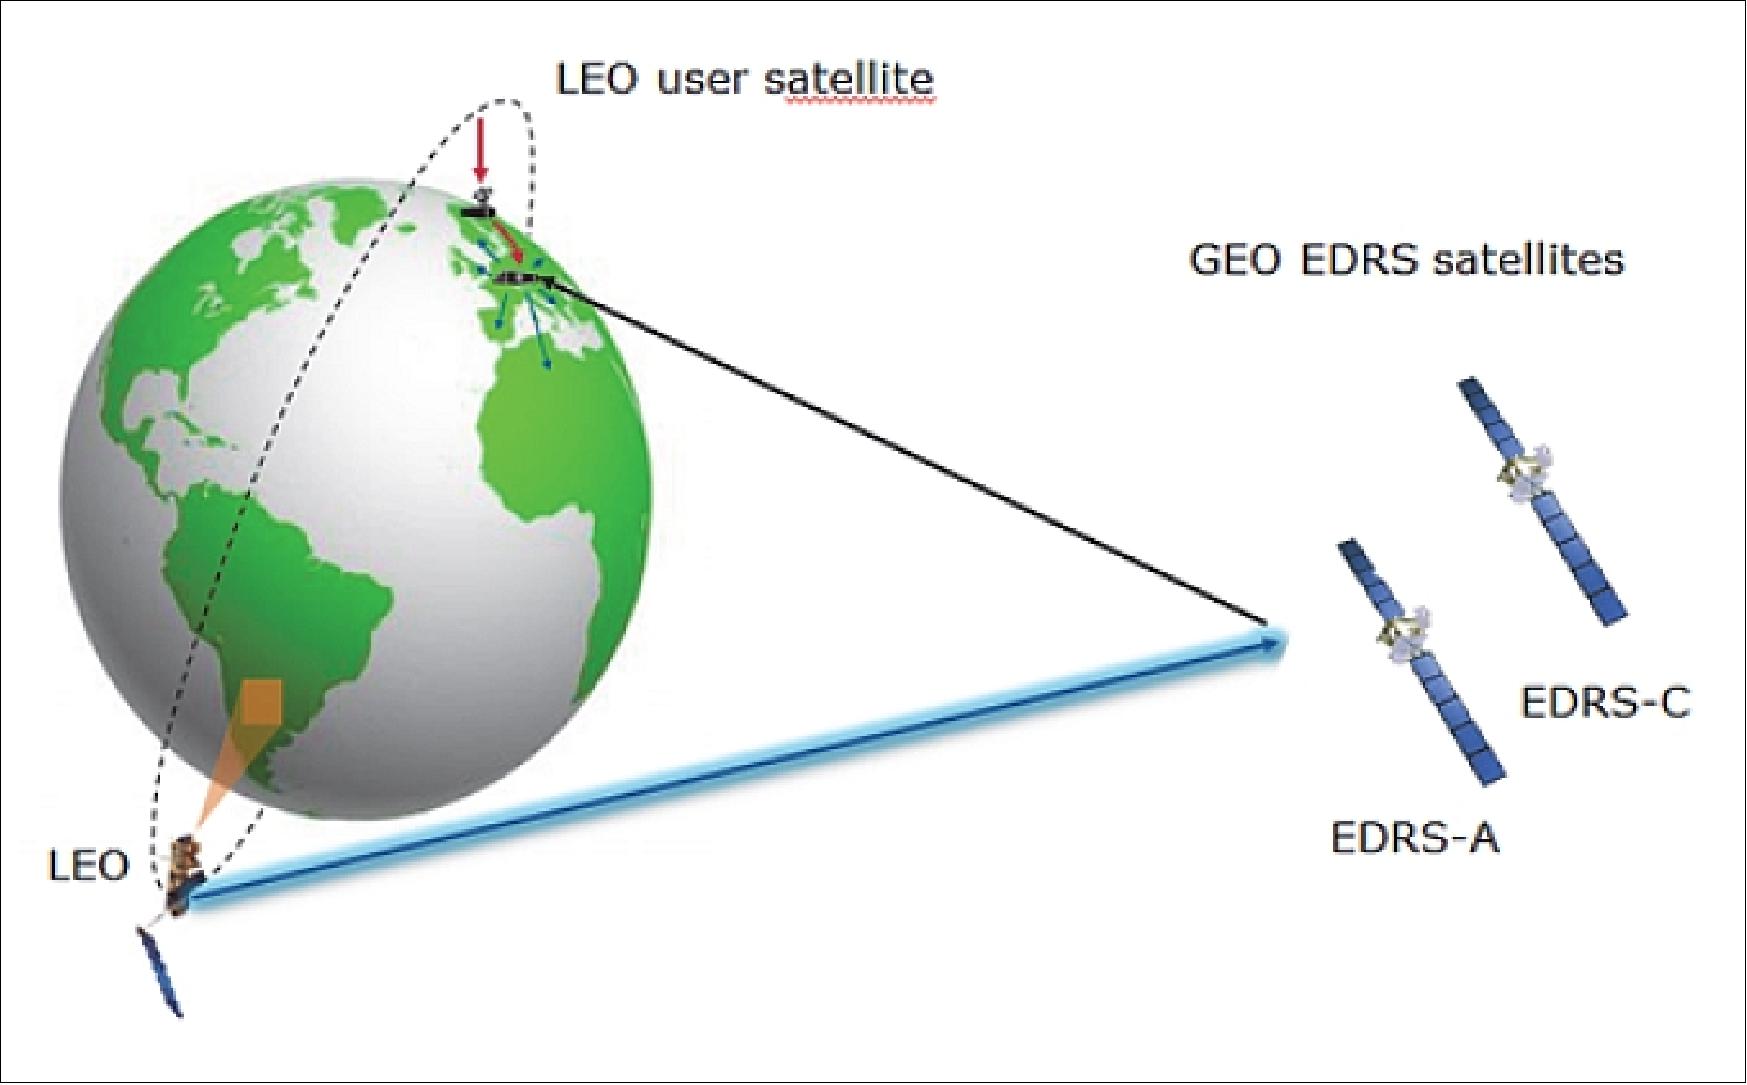 Figure 23: EDRS infrastructure currently under development depicting the EDRS-A and EDRS-C nodes of the space segment (image credit: ESA)